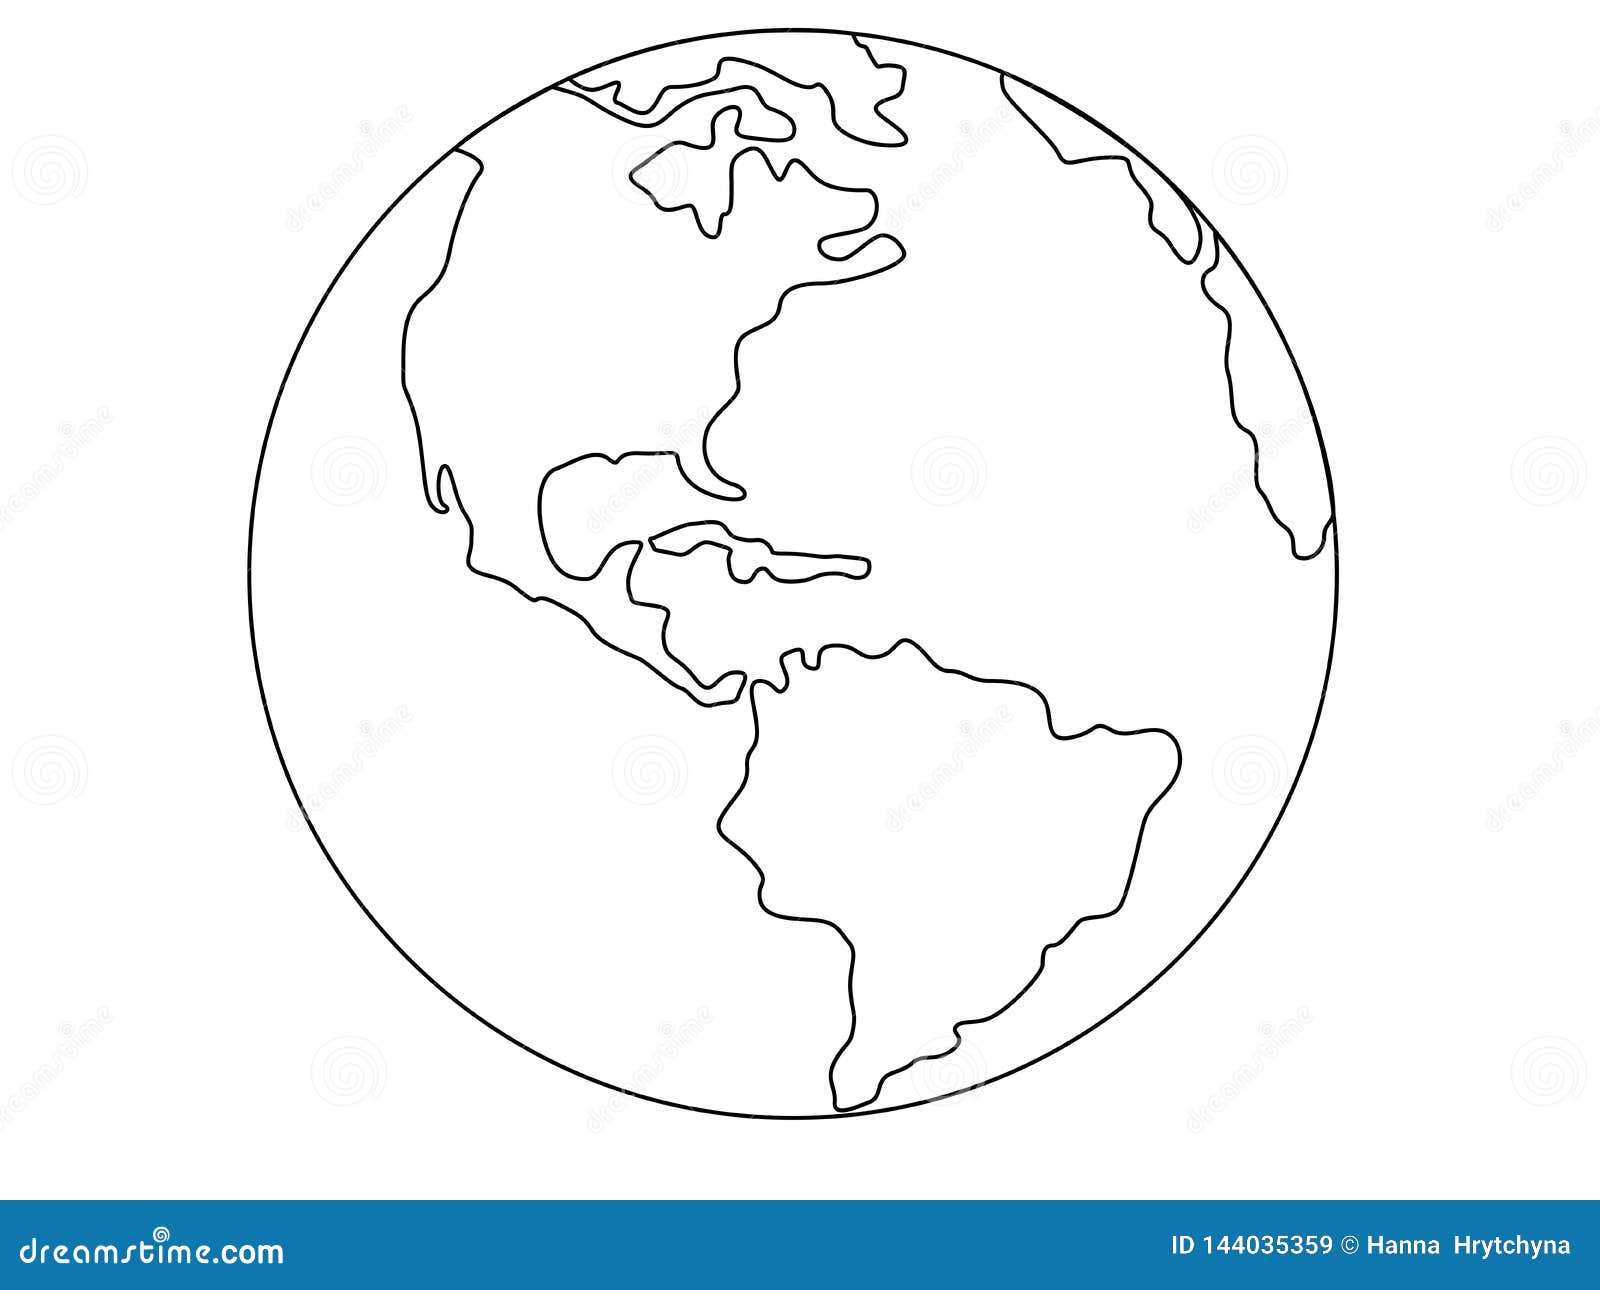 planet earth, globe  linear picture. outline. north and south america. central america. the atlantic ocean and the pacific o